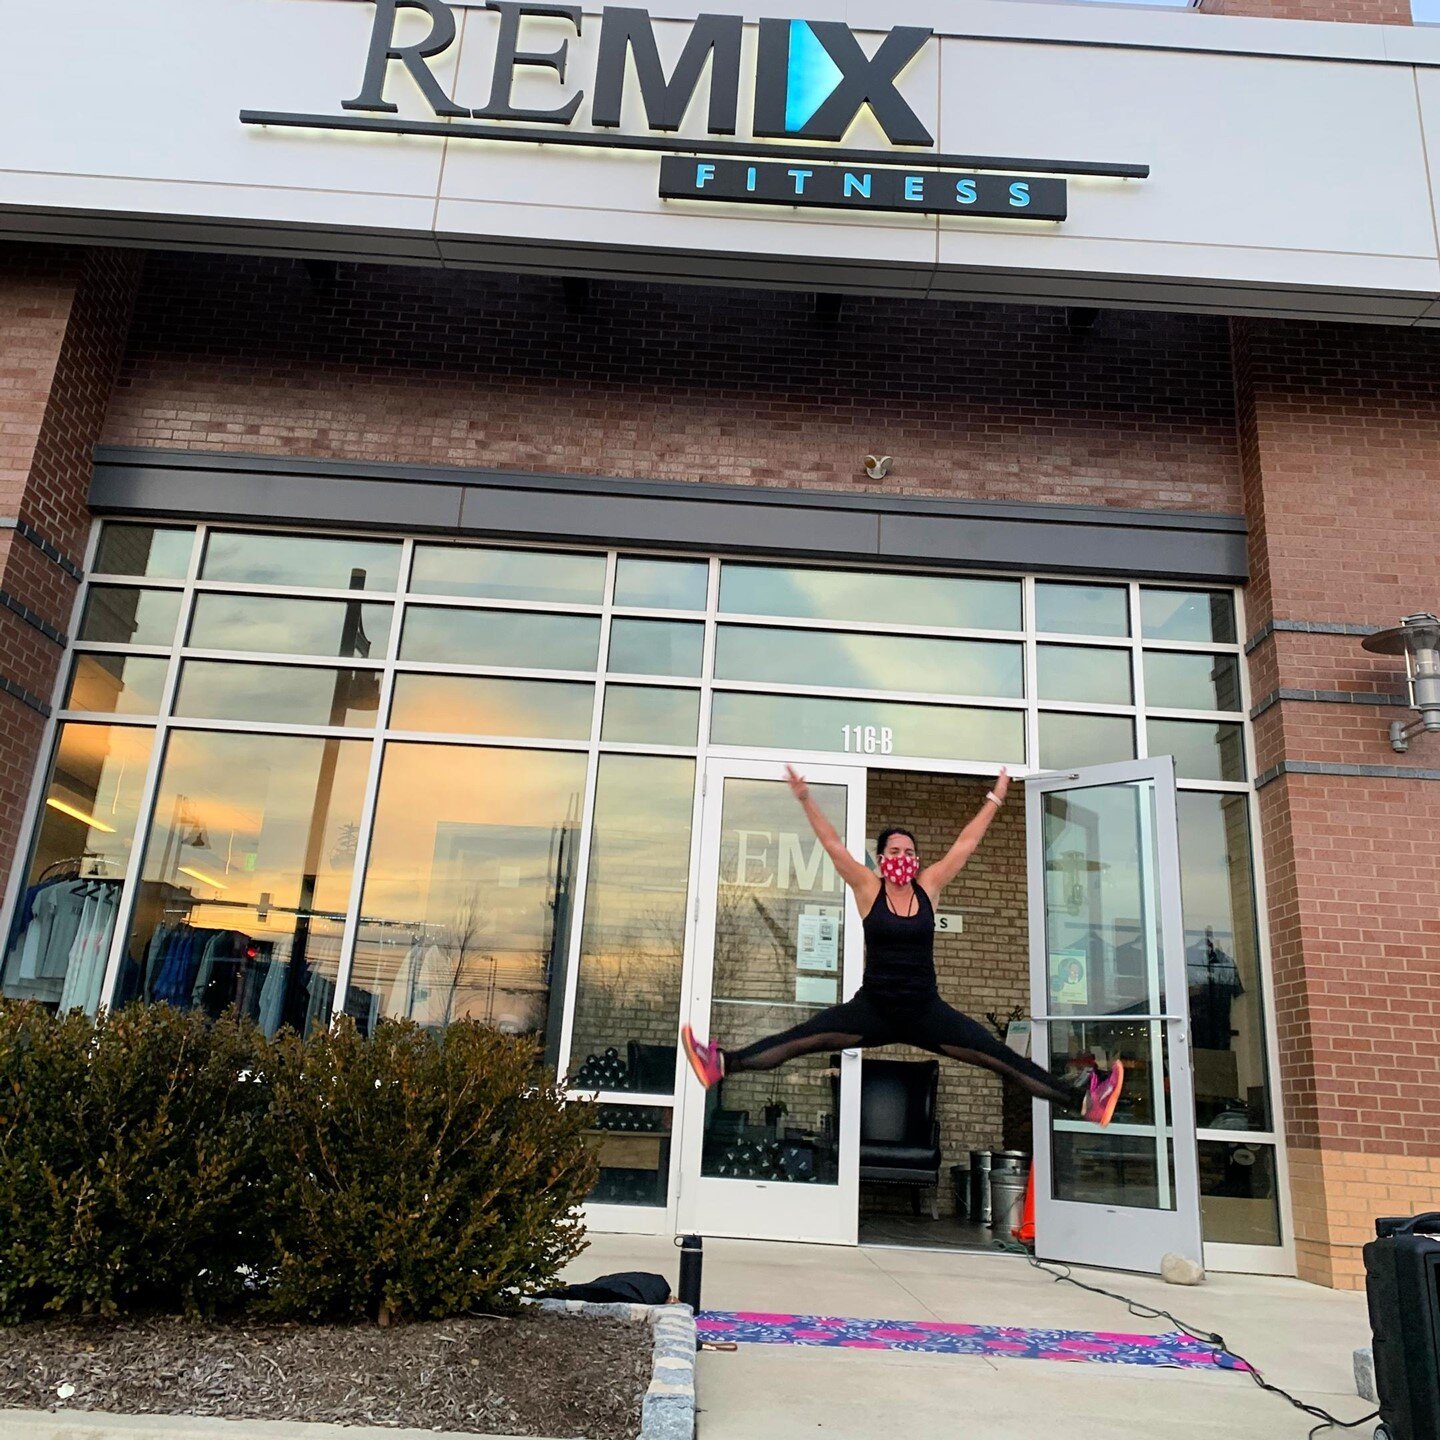 Our birthday girl Jennifer is flying high!! 🎉⁠
⁠
Please join us in wishing our tabata and dance queen a very happy birthday! We loved that she took her lunch break today to mix it up, and if you haven't tried her classes on Sundays at 4:00 pm and Tu